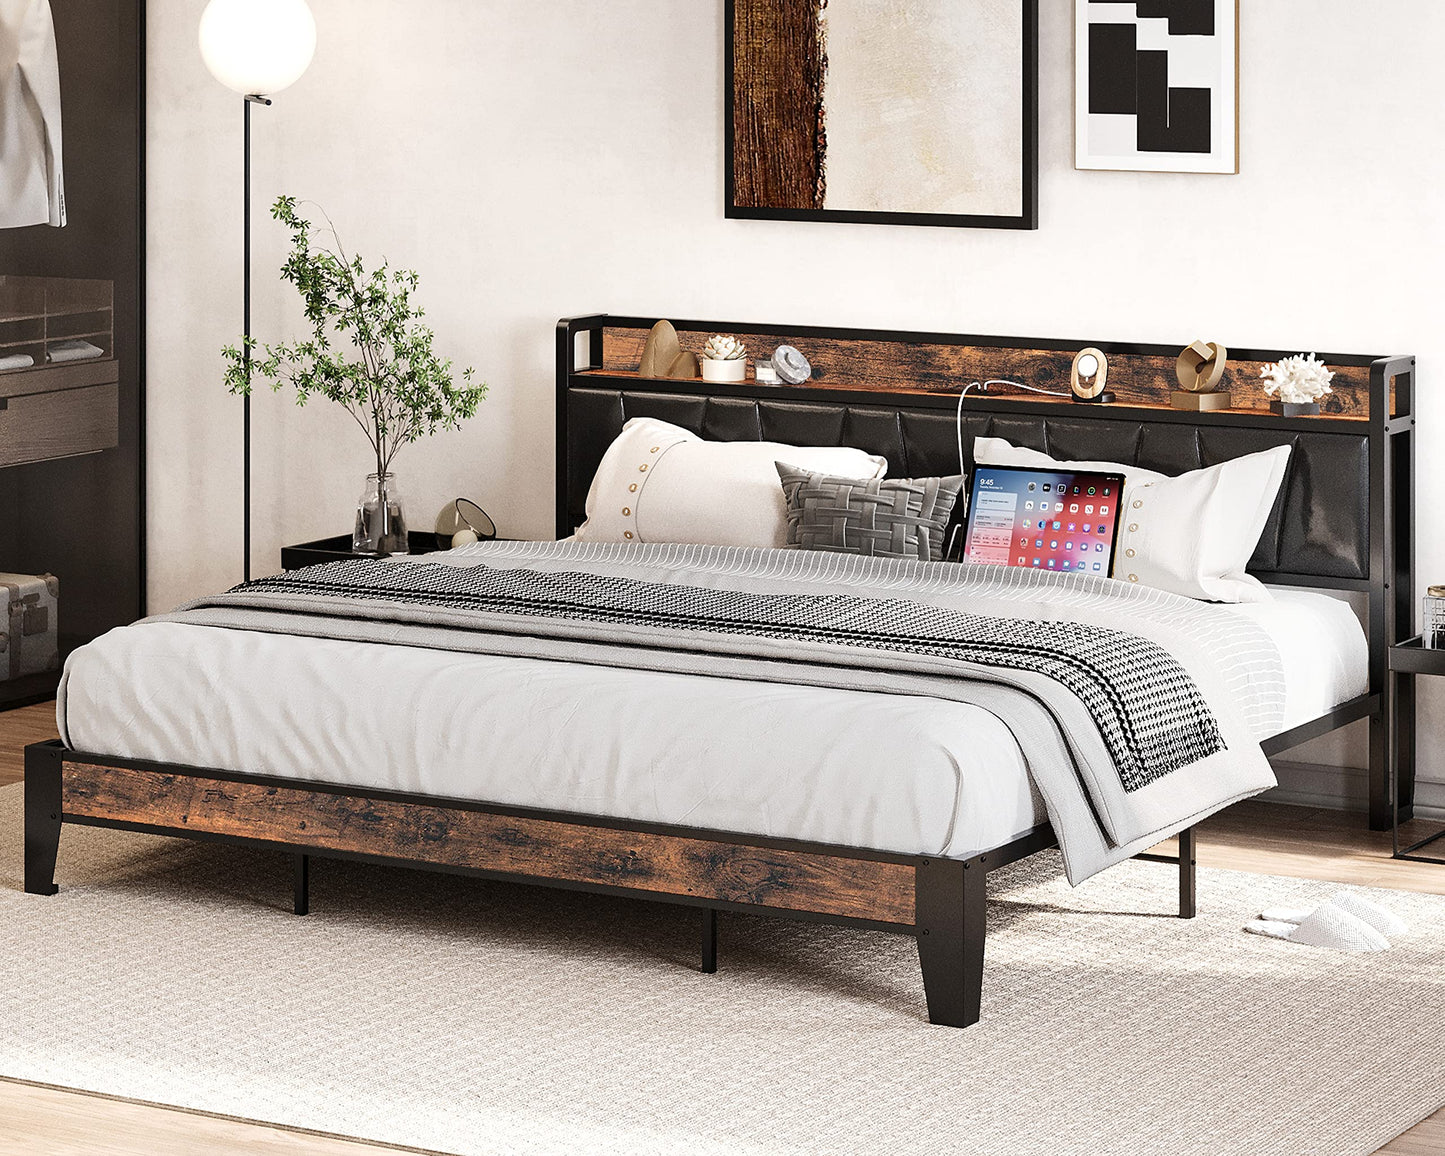 LIKIMIO King Bed Frame, Storage Headboard with Charging Station, Solid and Stable, Noise Free, No Box Spring Needed, Easy Assembly (Vintage and